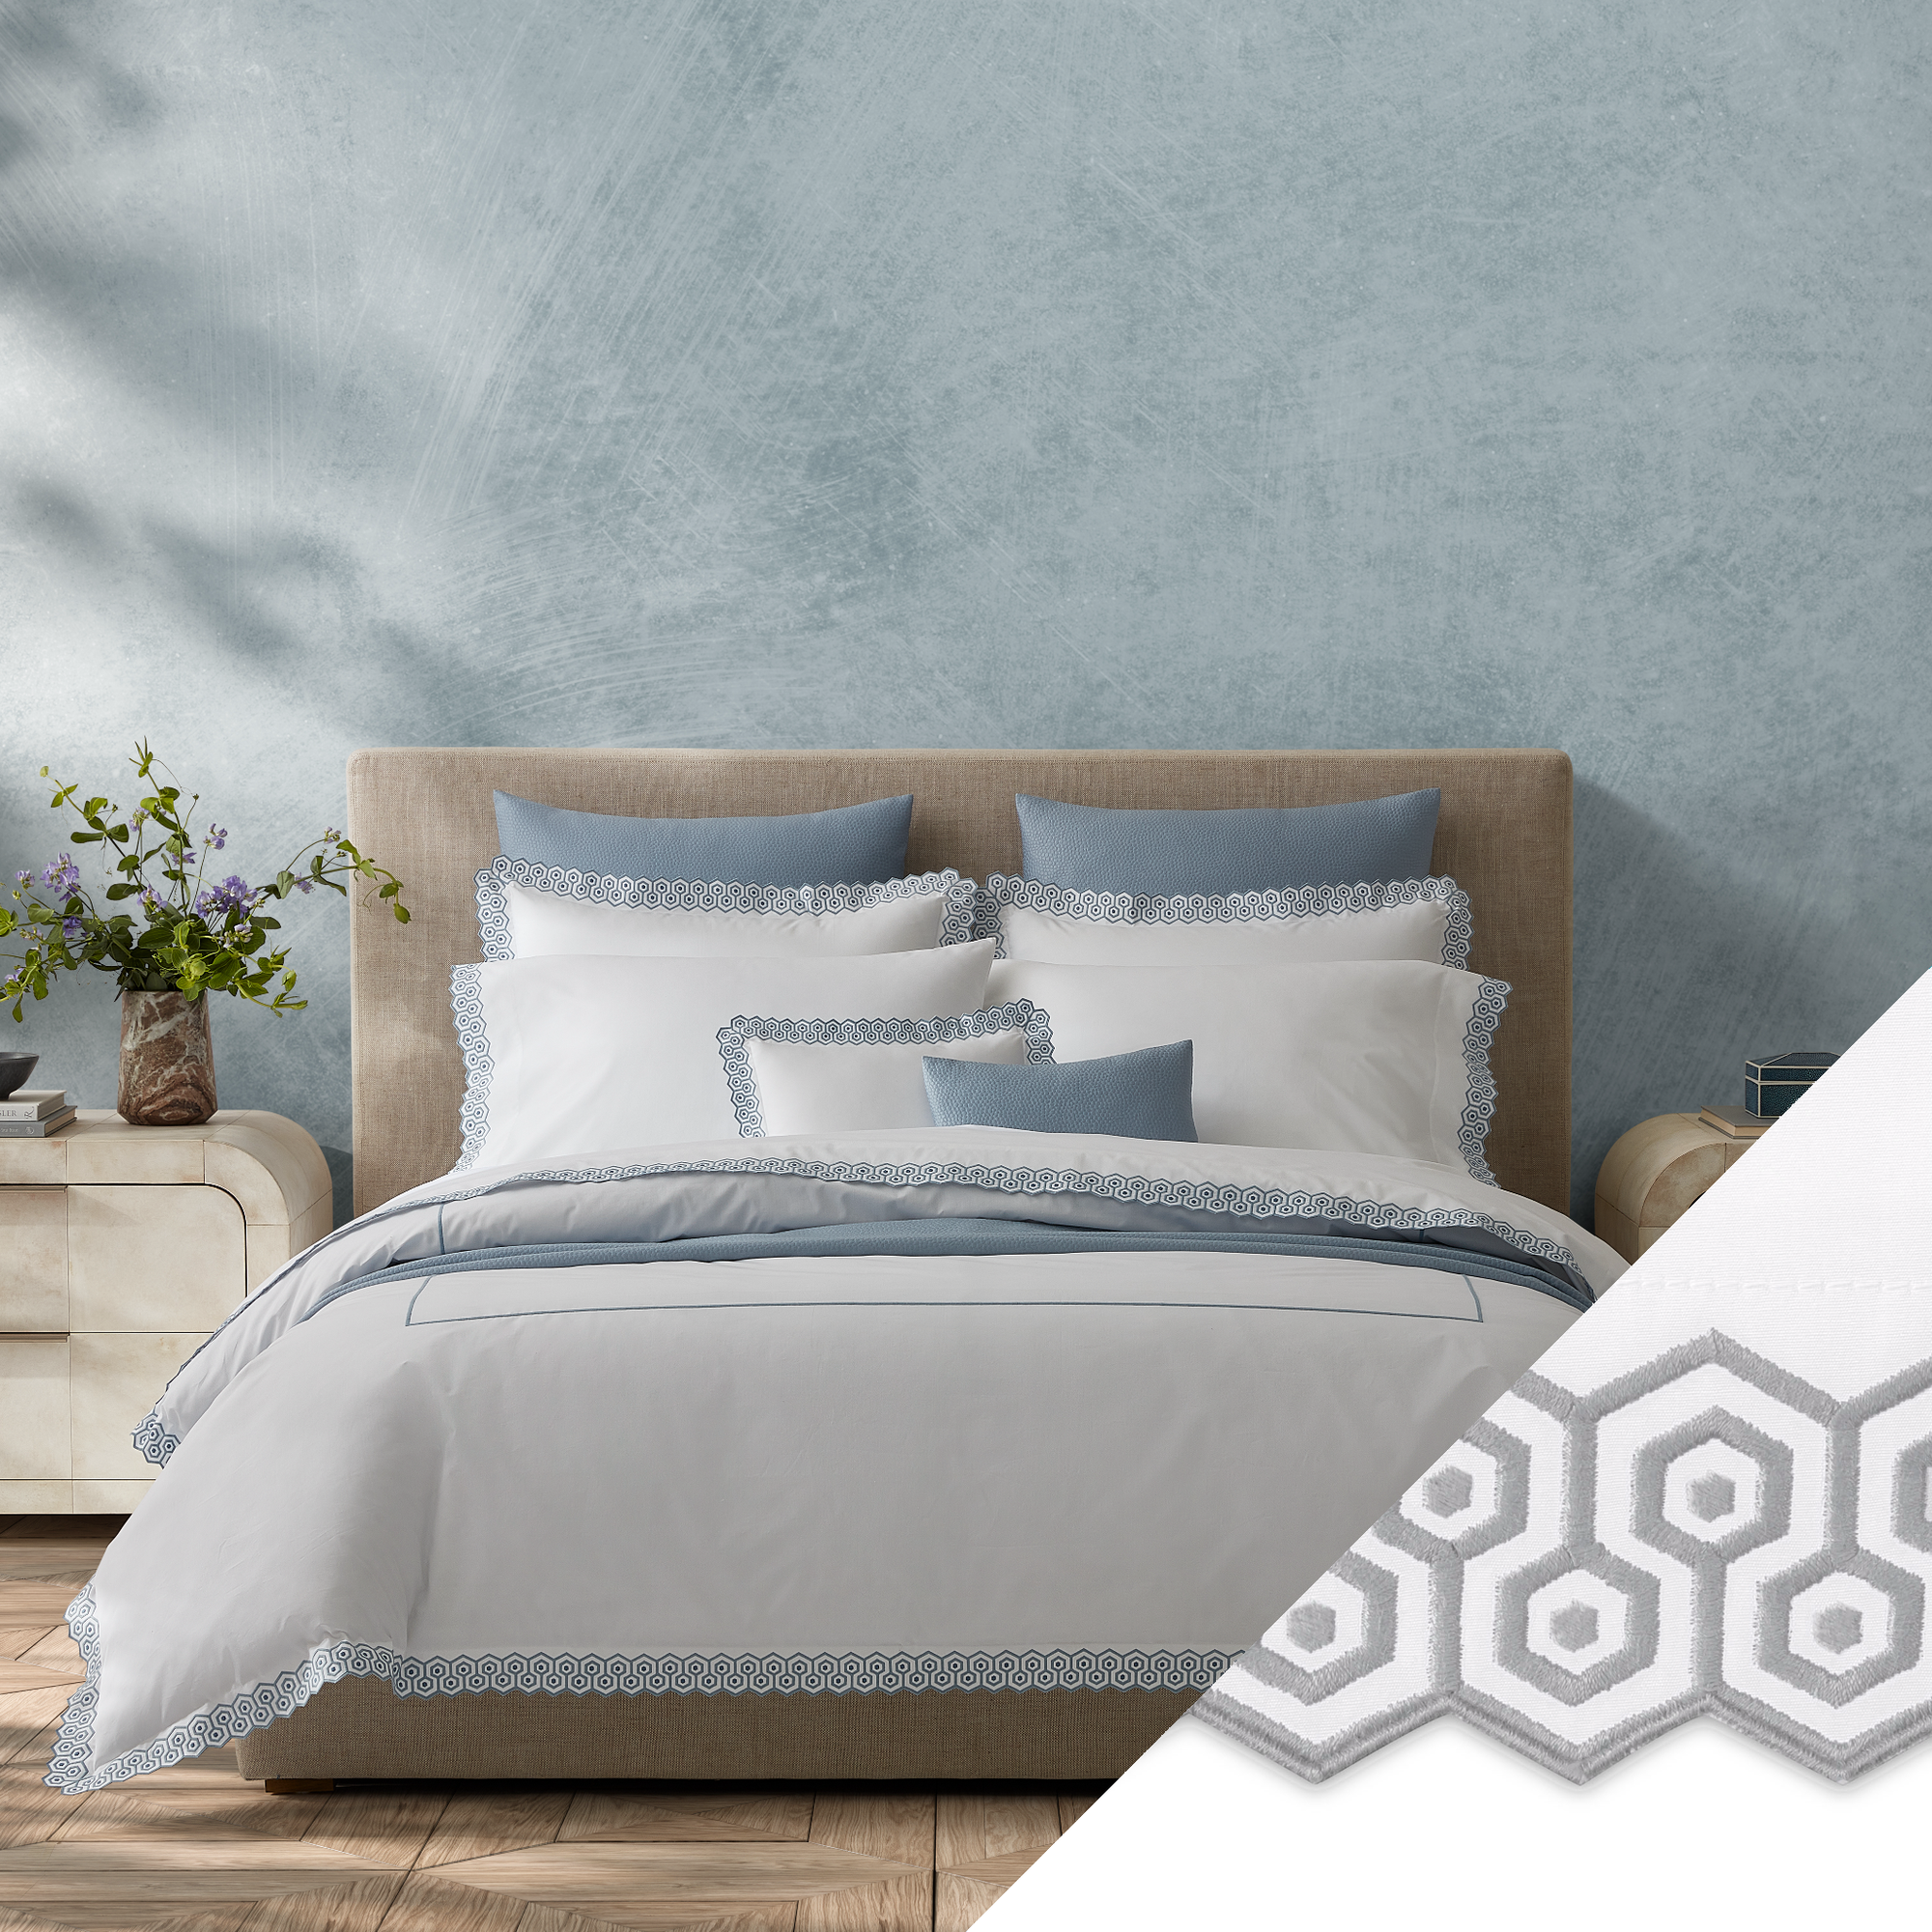 Full Bed Dressed in Matouk Felix Bedding in Hazy Blue Color with Silver Swatch